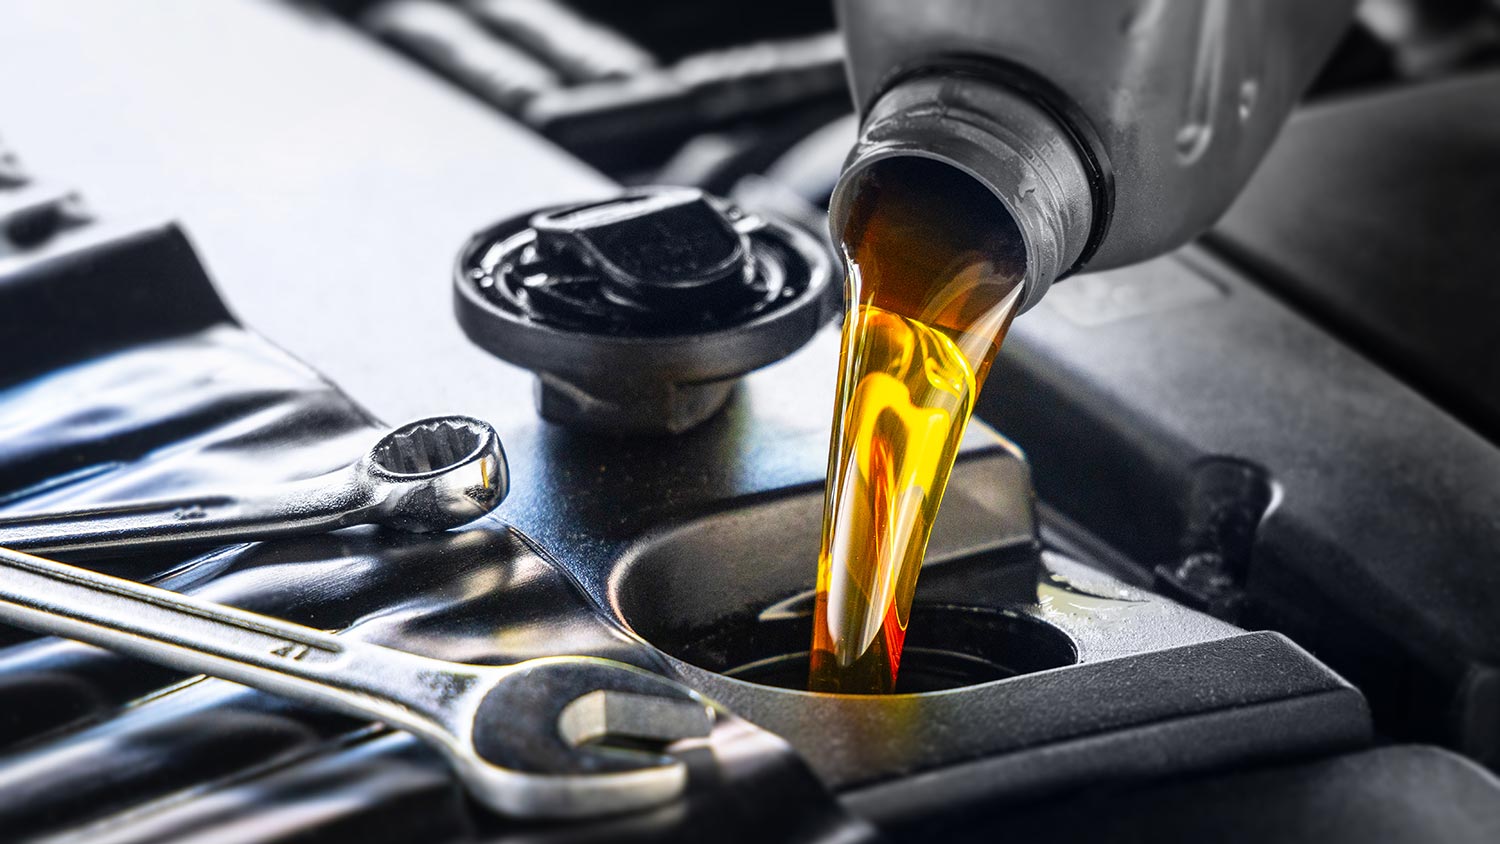 Pouring motor oil for motor vehicles from a gray bottle into the engine